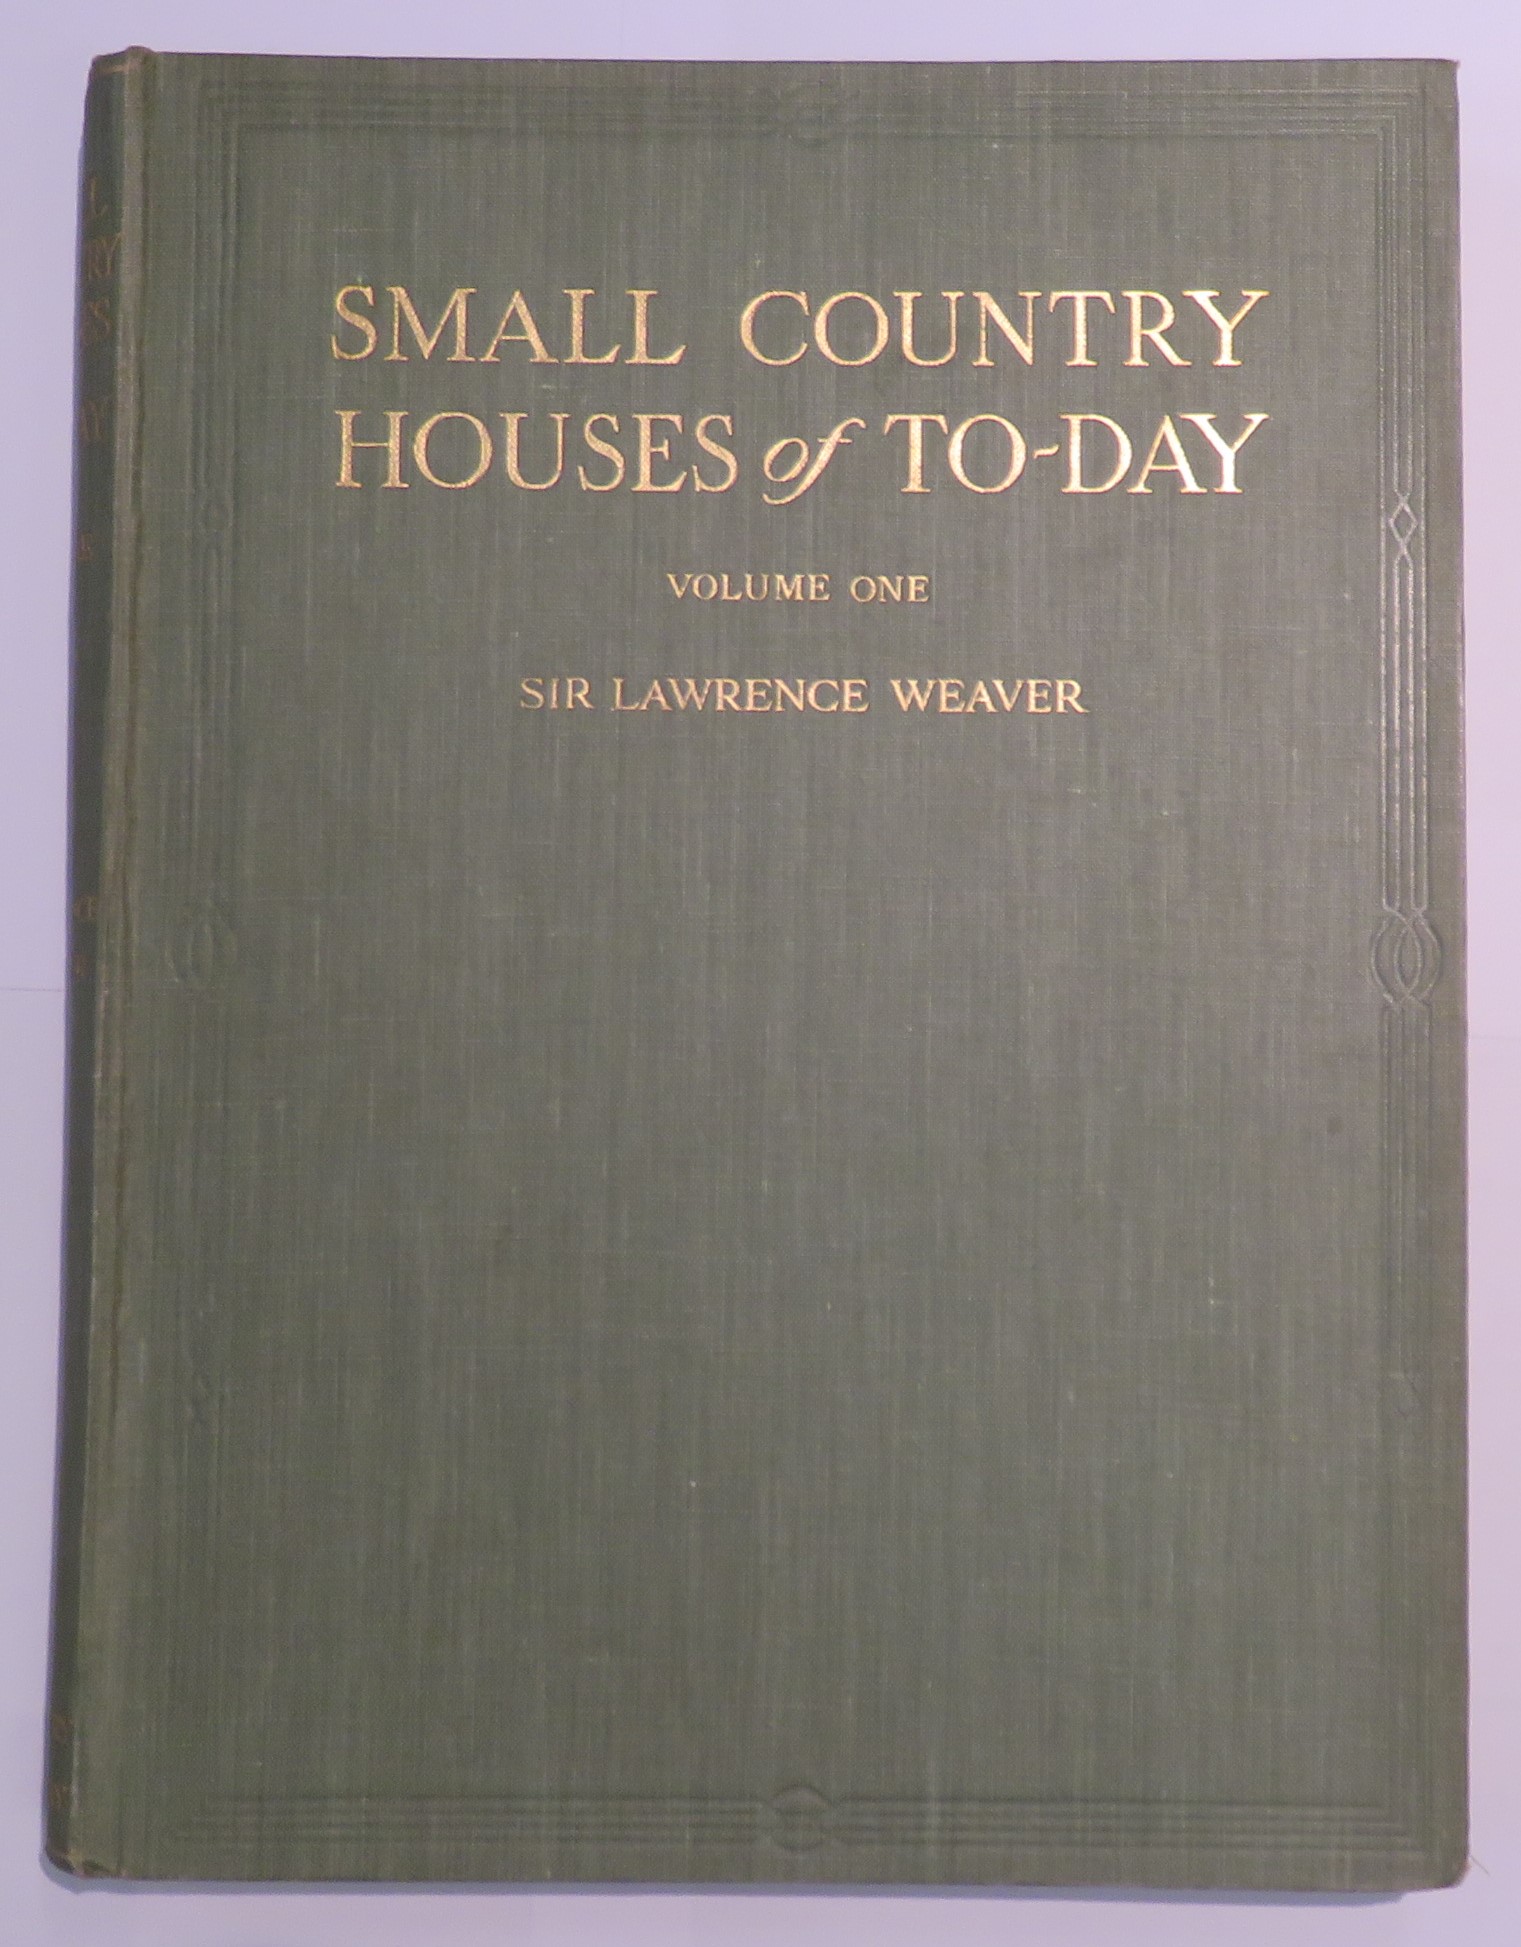 Small Country Houses of Today: Complete in Three Volumes